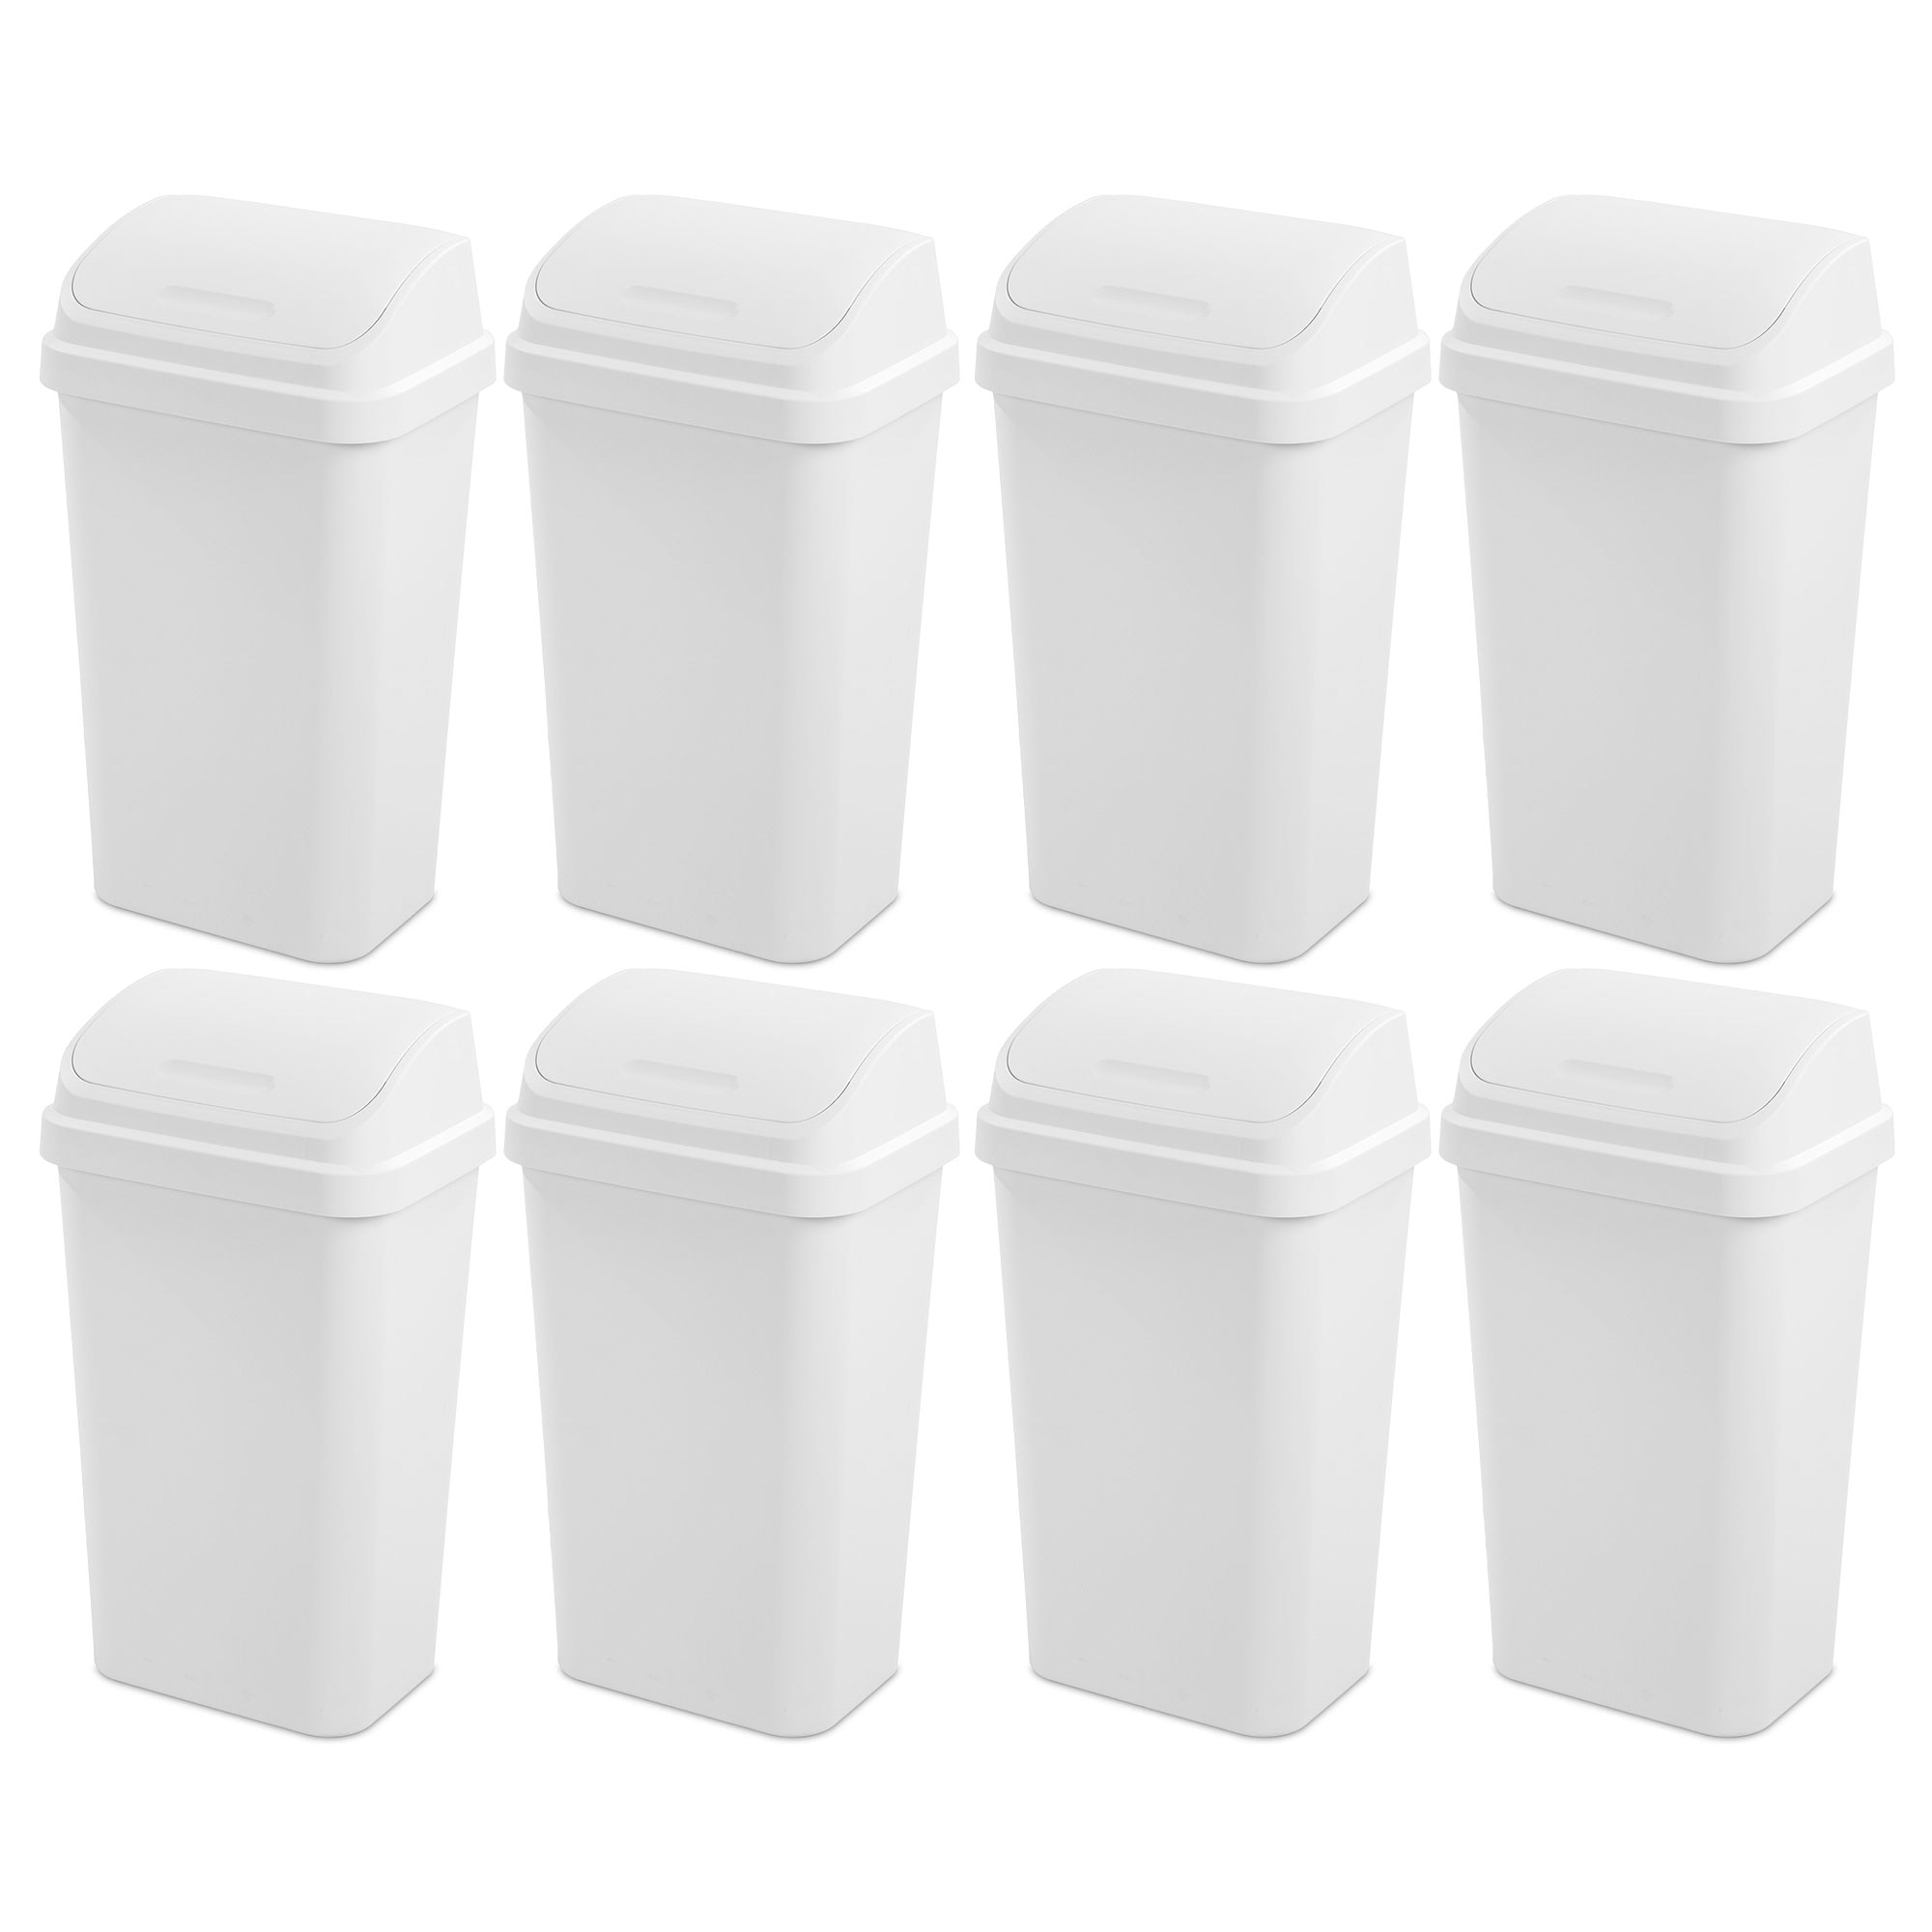 https://ak1.ostkcdn.com/images/products/is/images/direct/48dc6eaba4f4506caf28e48fb19960b360a6457b/Sterilite-13-Gal-Swing-Top-Lidded-Wastebasket-Kitchen-Trash-Can%2C-White-%288-Pack%29.jpg